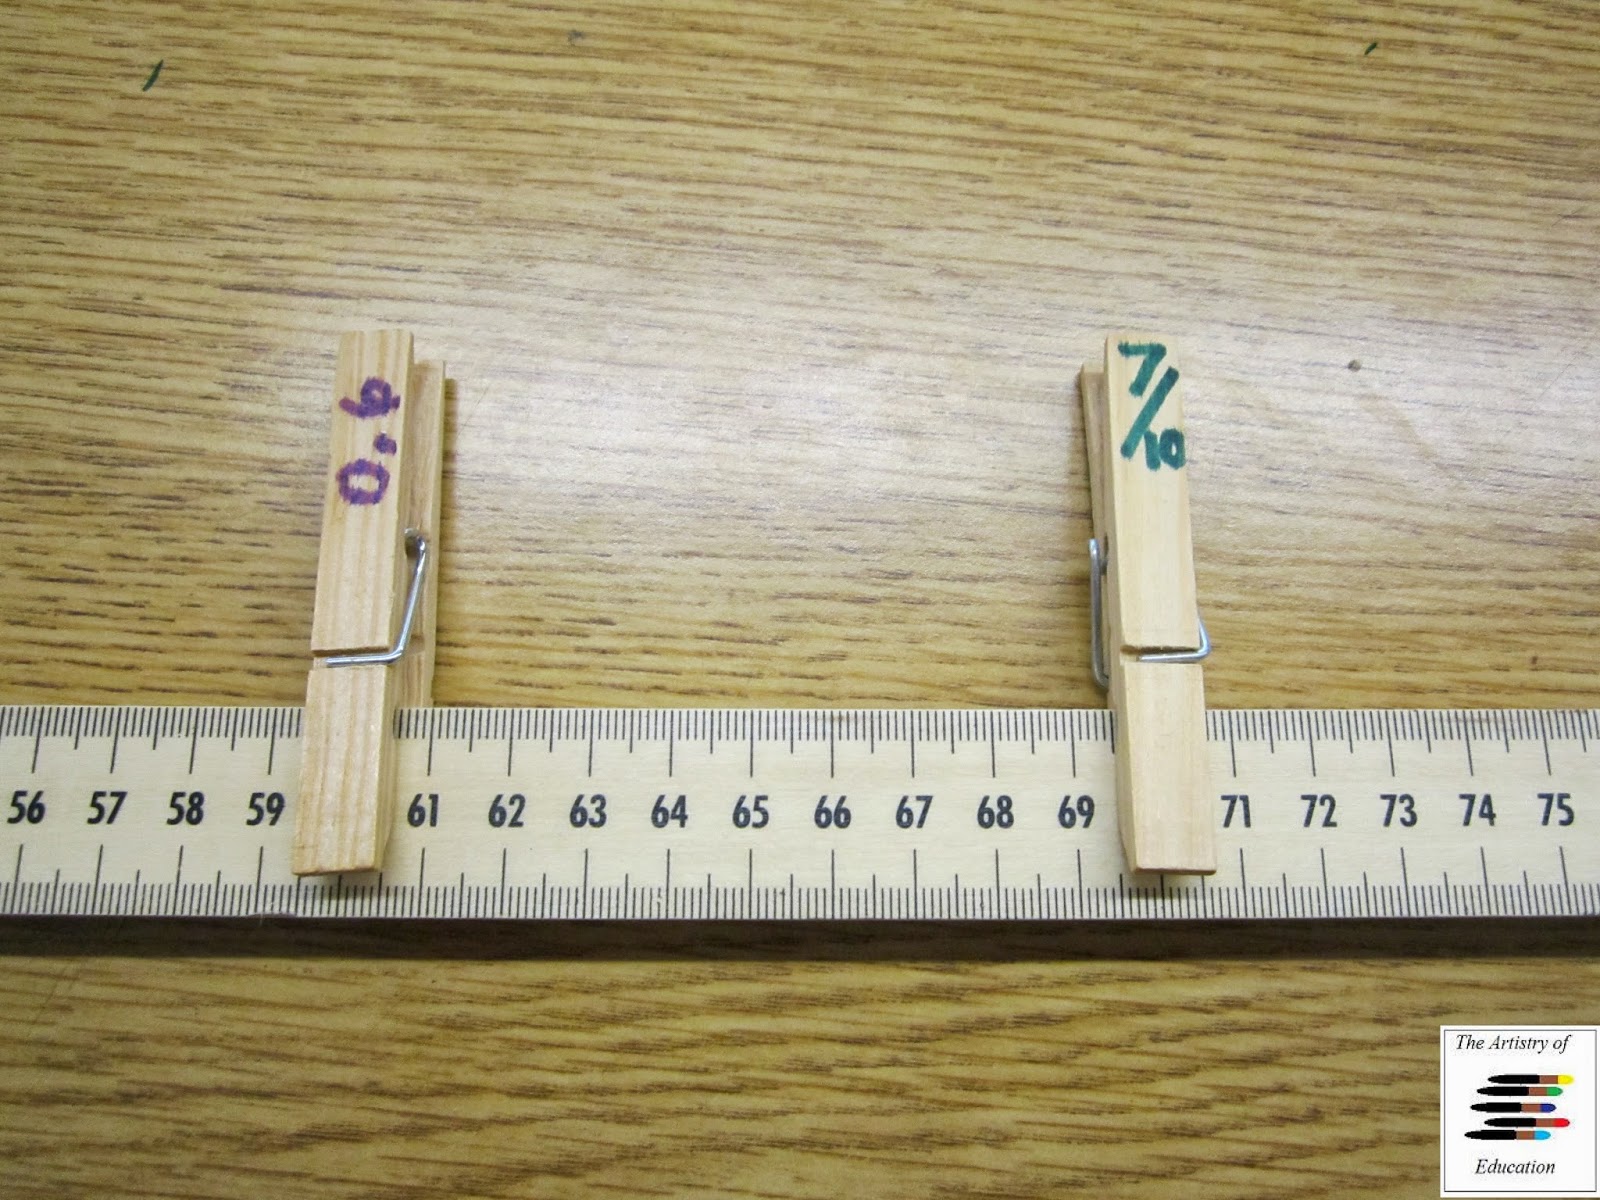 Artistry of Education: Using a Meter Stick as a Number Line Part 2